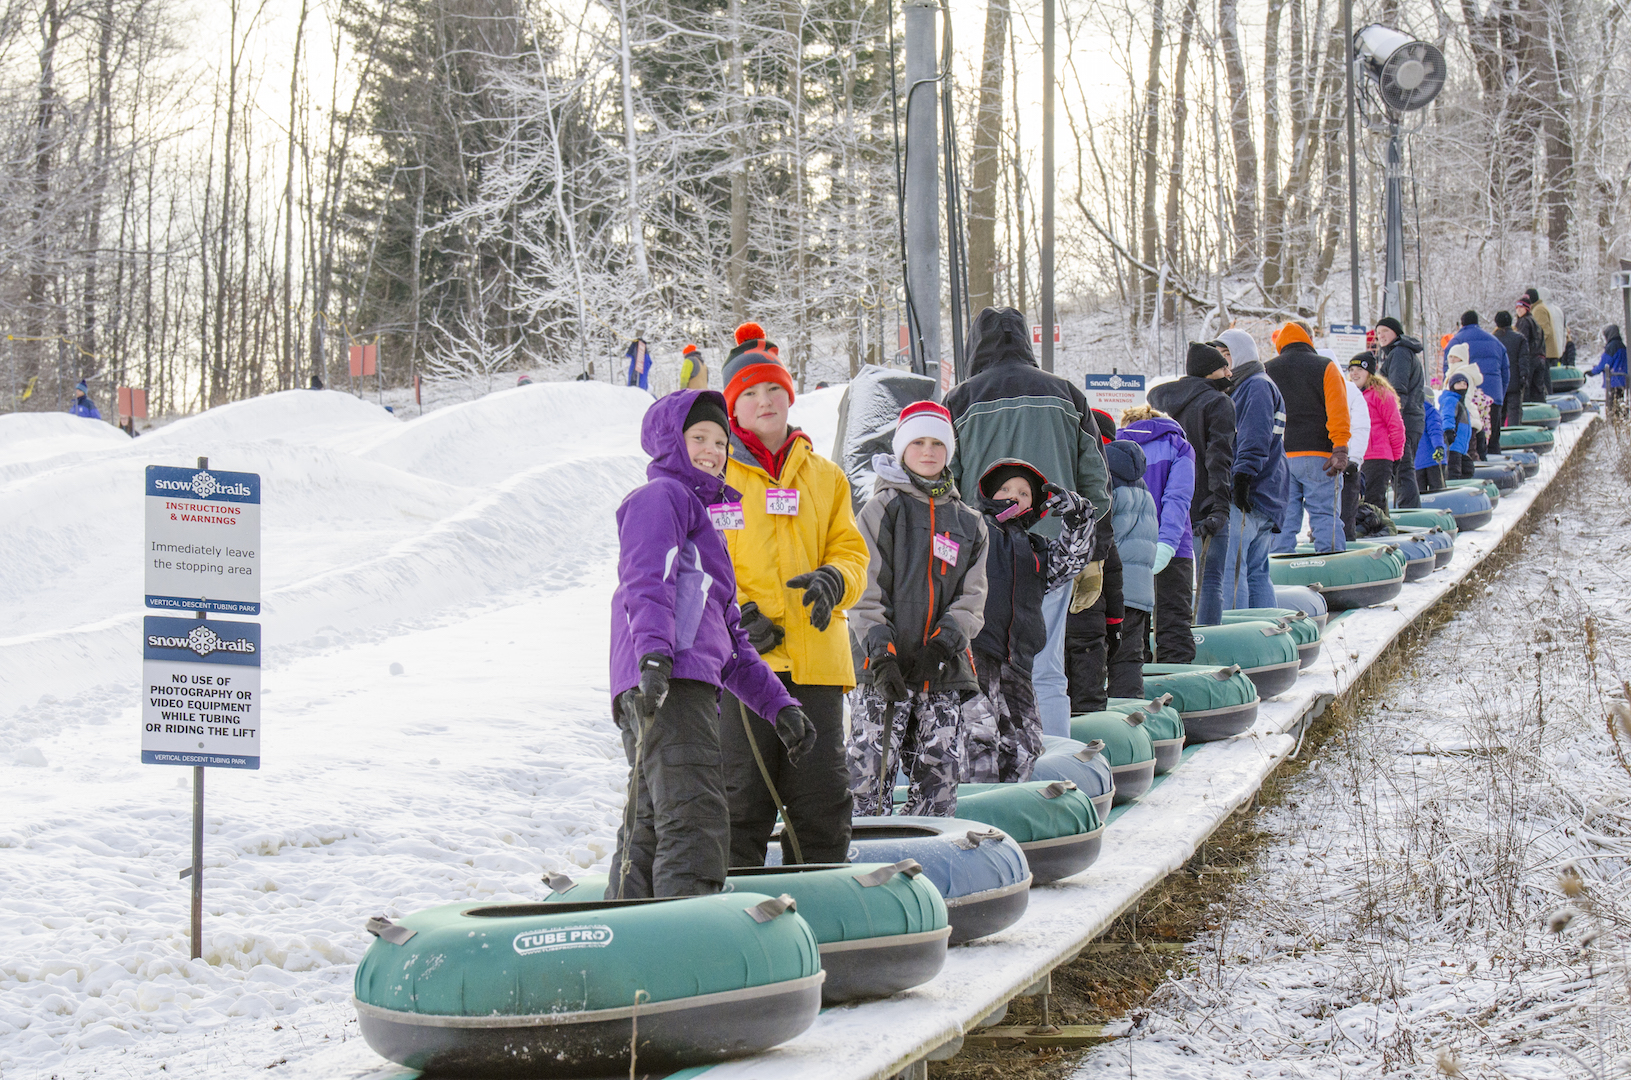 Need Some Outdoor Winter Fun in Your Life This Holiday Weekend?